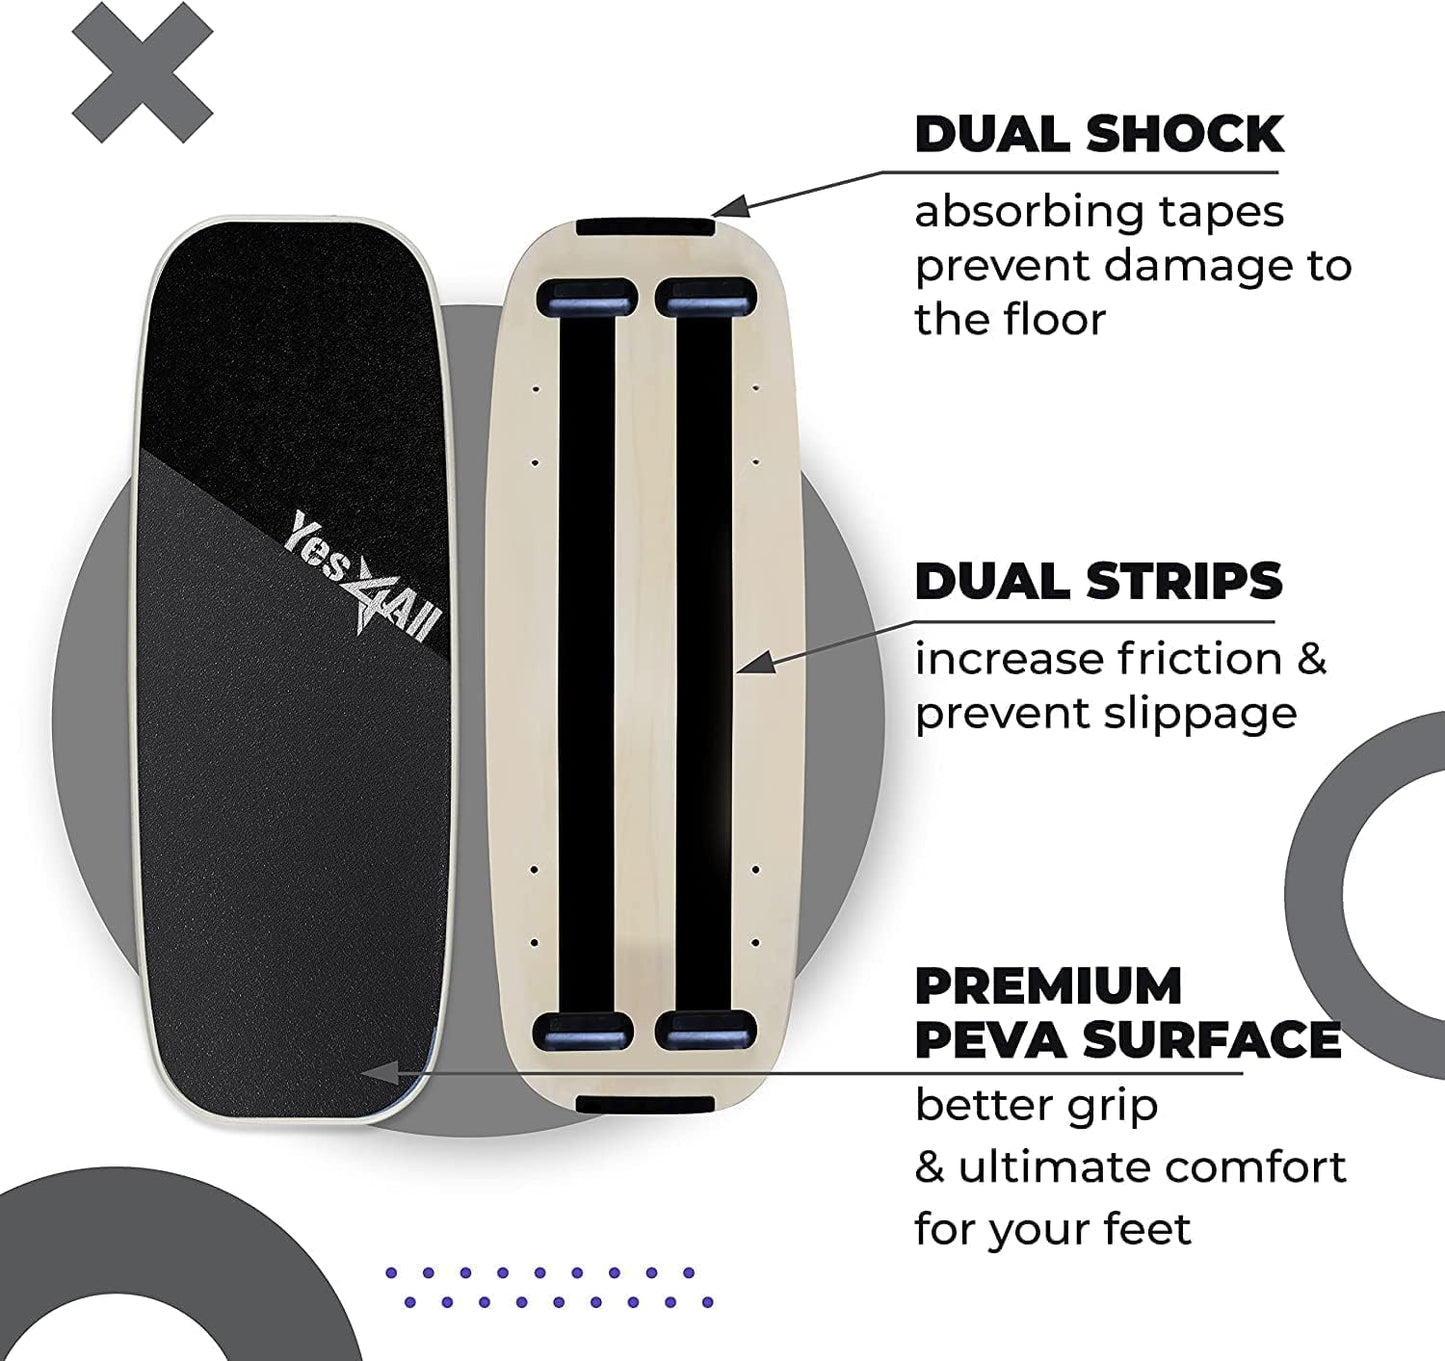 Yes4All Premium Surf Balance Board Trainer with Adjustable Stoppers for Improve Balance, Build Strength & Surf Trainer